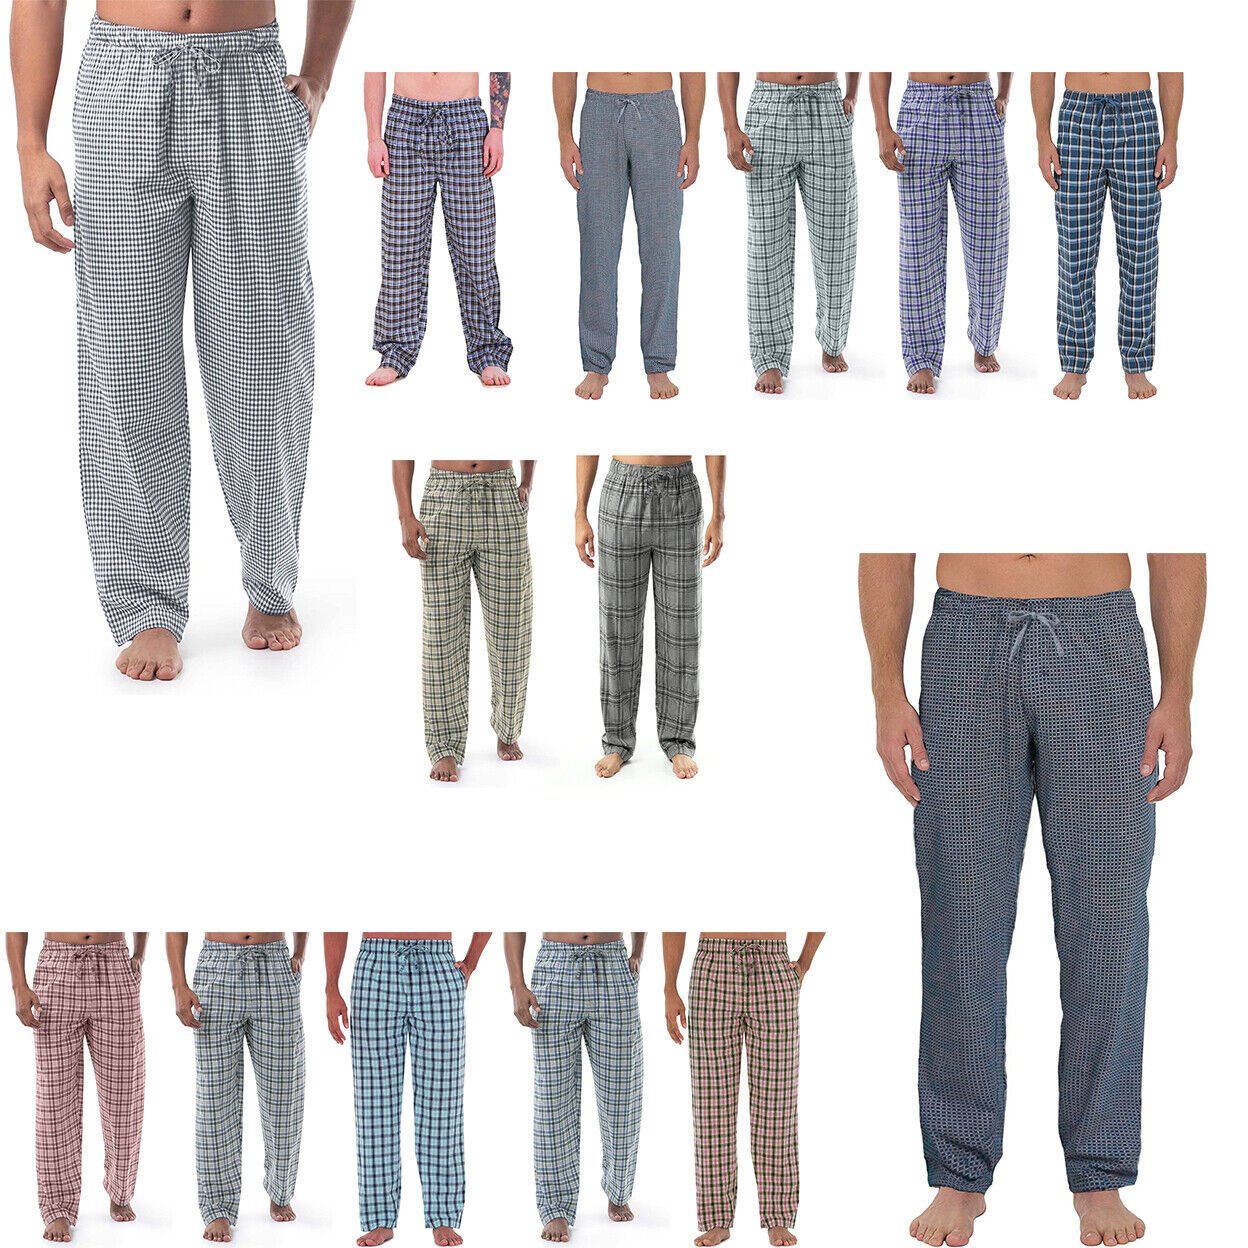 Multi-Pack: Men's Ultra-Soft Solid & Plaid Cotton Jersey Knit Comfy Sleep Lounge Pajama Pants - 1-pack Solid, Large